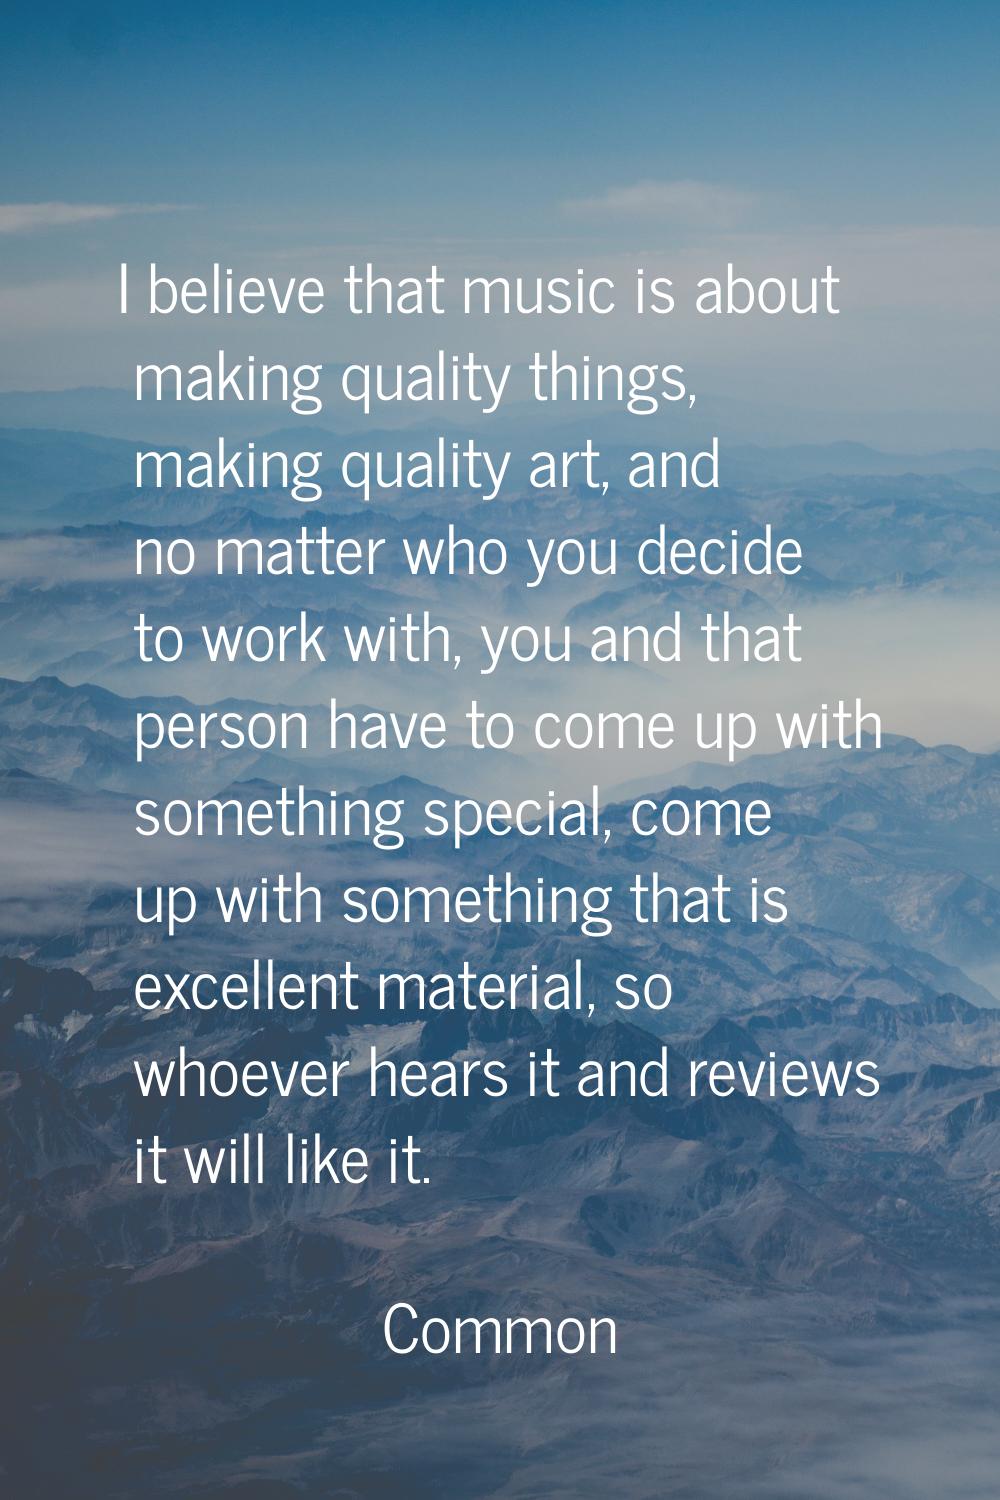 I believe that music is about making quality things, making quality art, and no matter who you deci